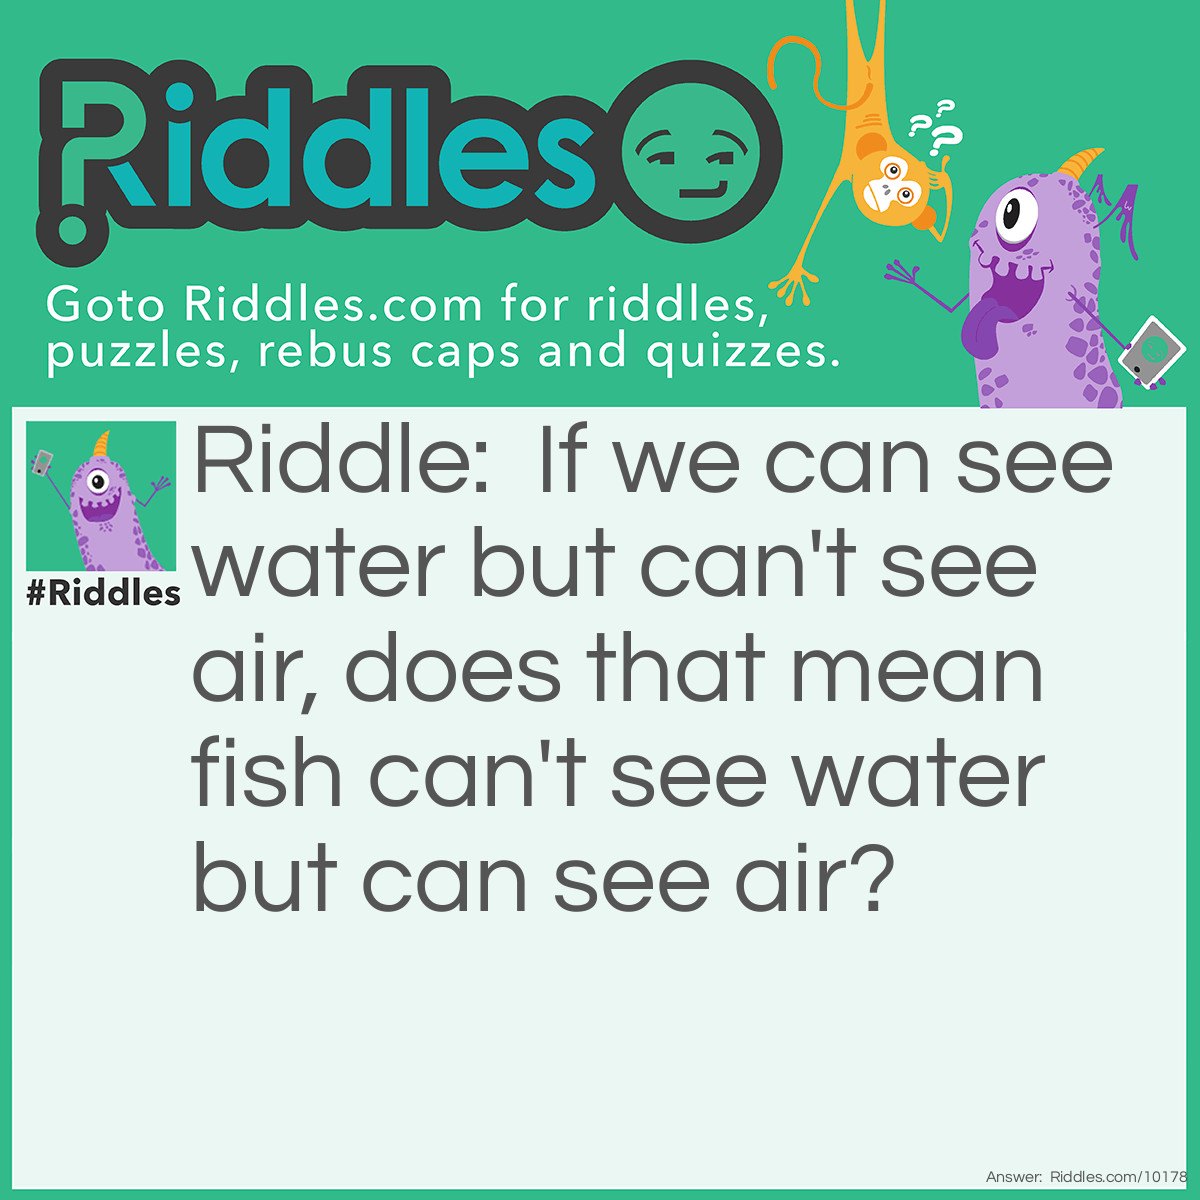 Riddle: If we can see water but can't see air, does that mean fish can't see water but can see air? Answer: There's no right or wrong answers.